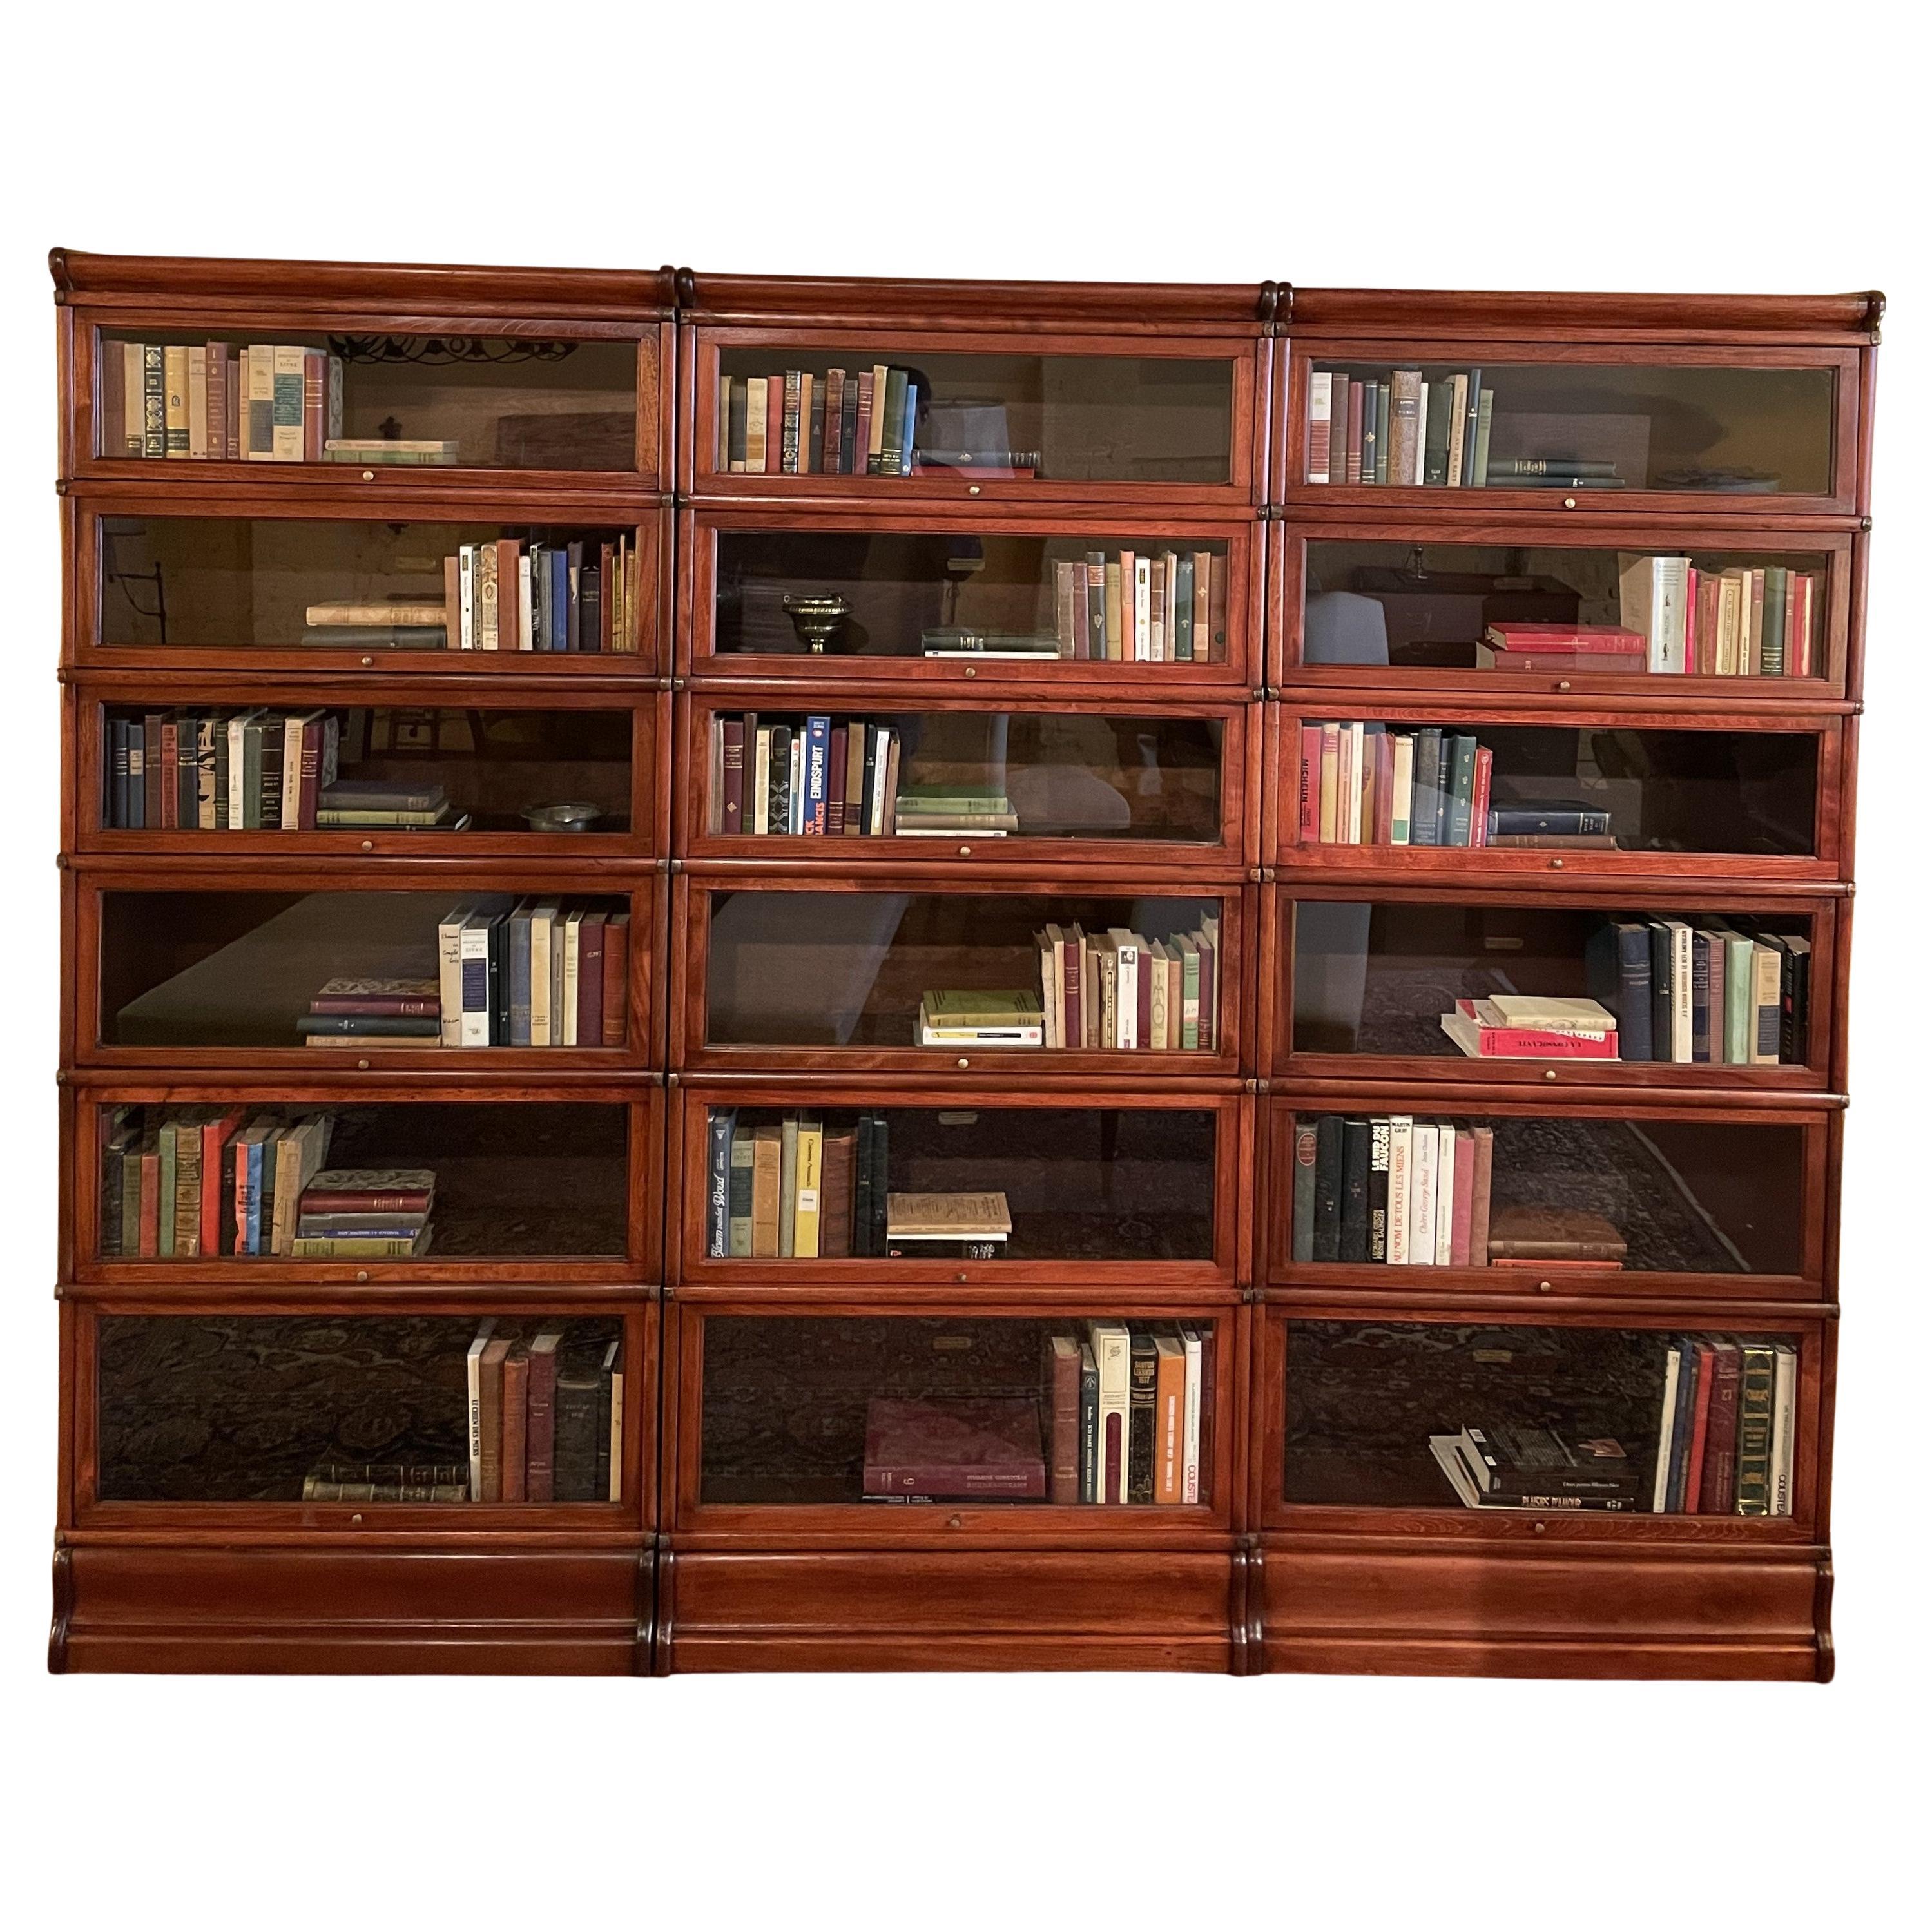 A Set Of 3 Globe Wernicke Bookcase In Mahogany From The 19th Century For Sale